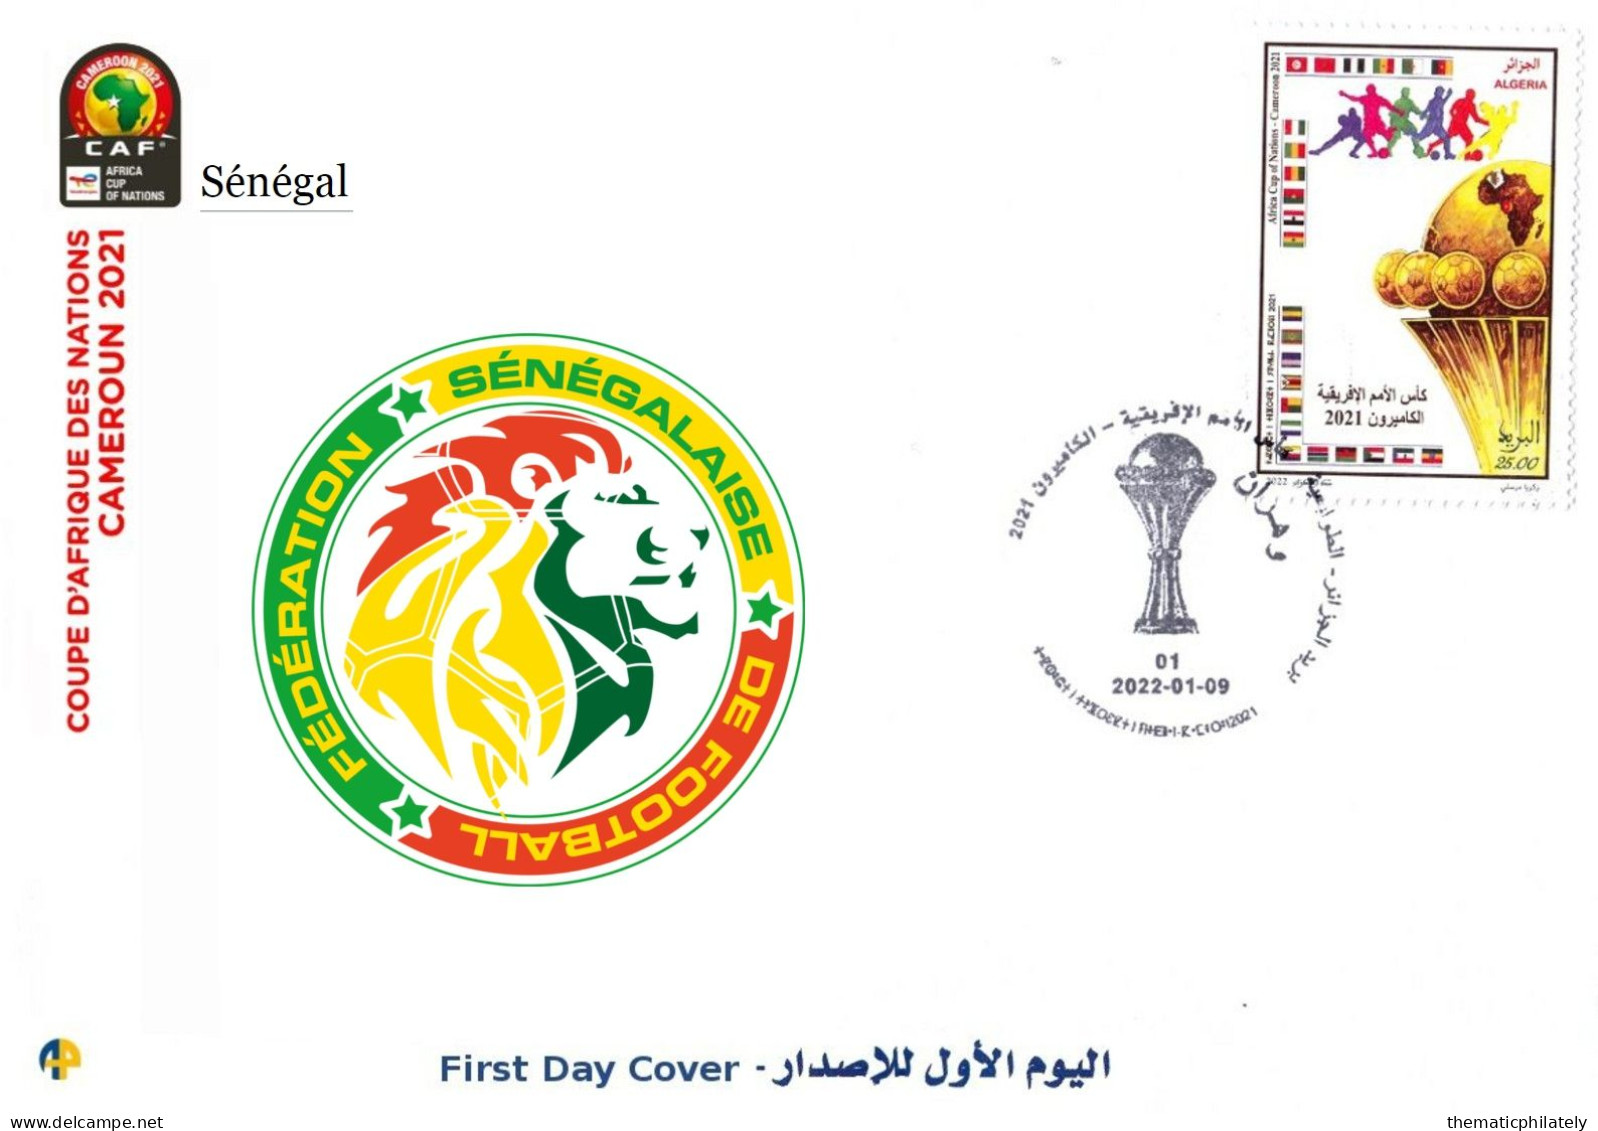 Algeria FDC 1888 Coupe D'Afrique Des Nations Football 2021 Africa Cup Of Nations Soccer CAF Sénégal Senegal - Africa Cup Of Nations